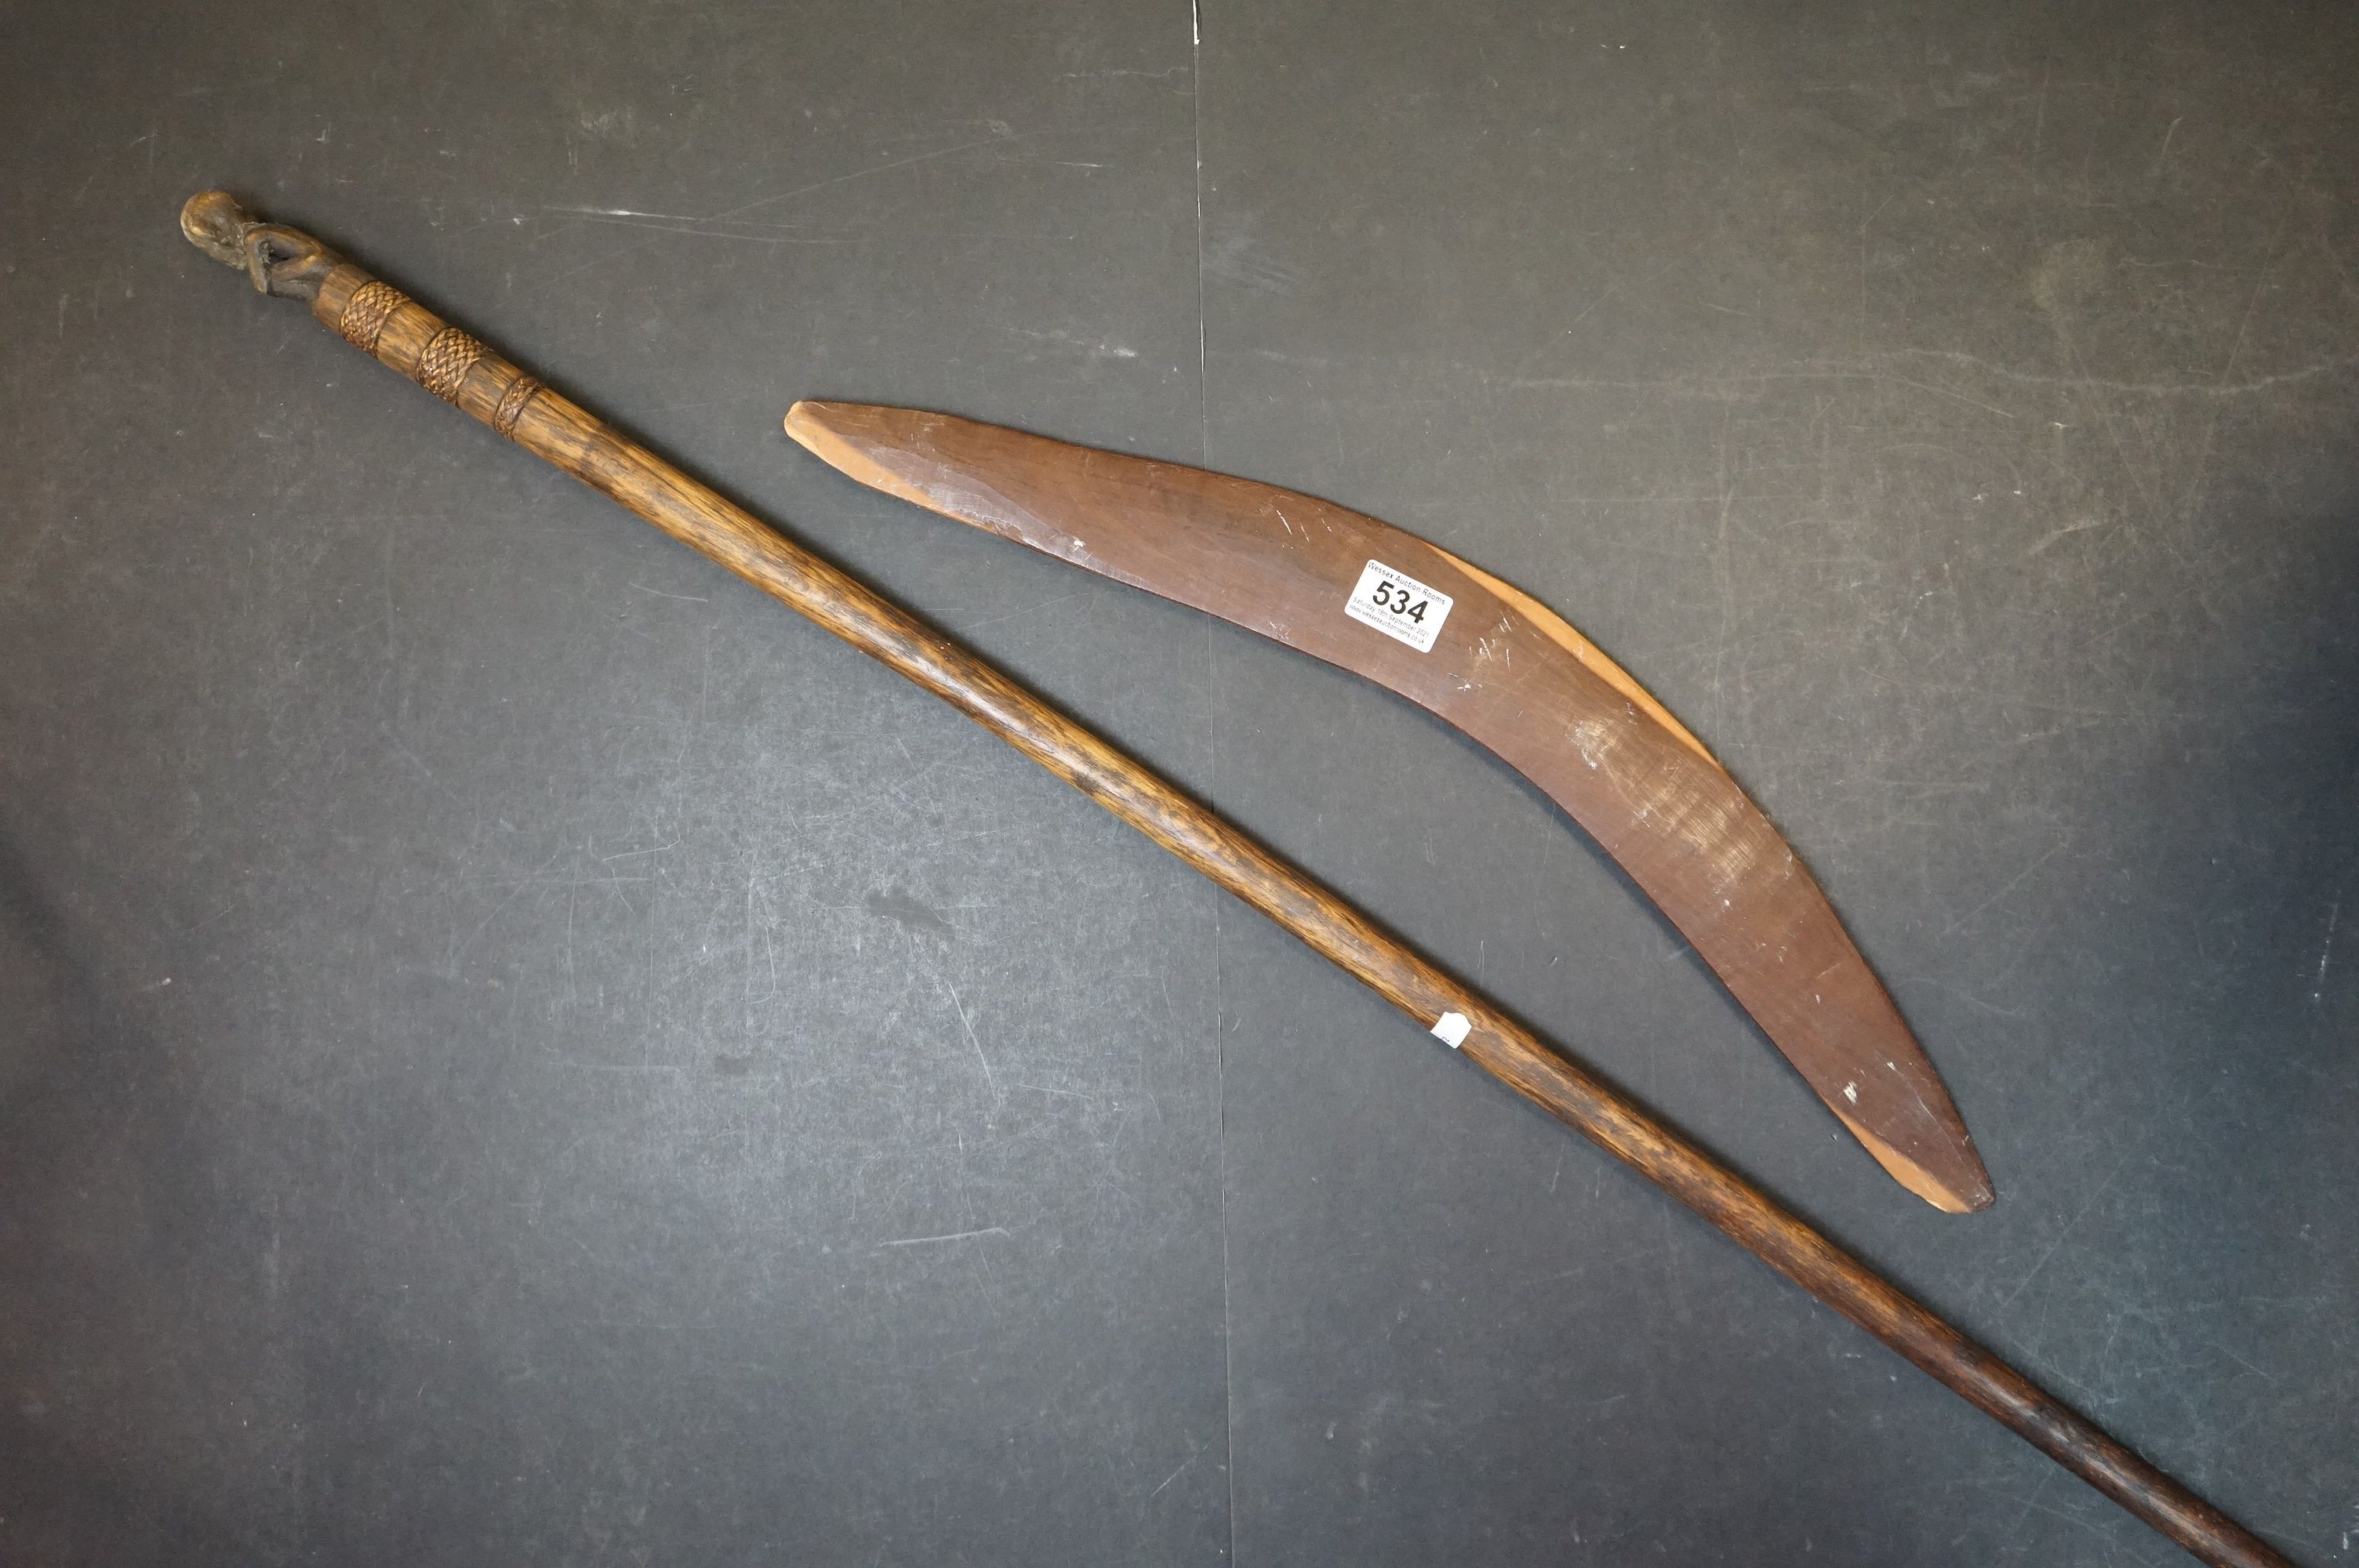 A vintage carved wooden boomerang with Emu decoration and a Wooden Staff